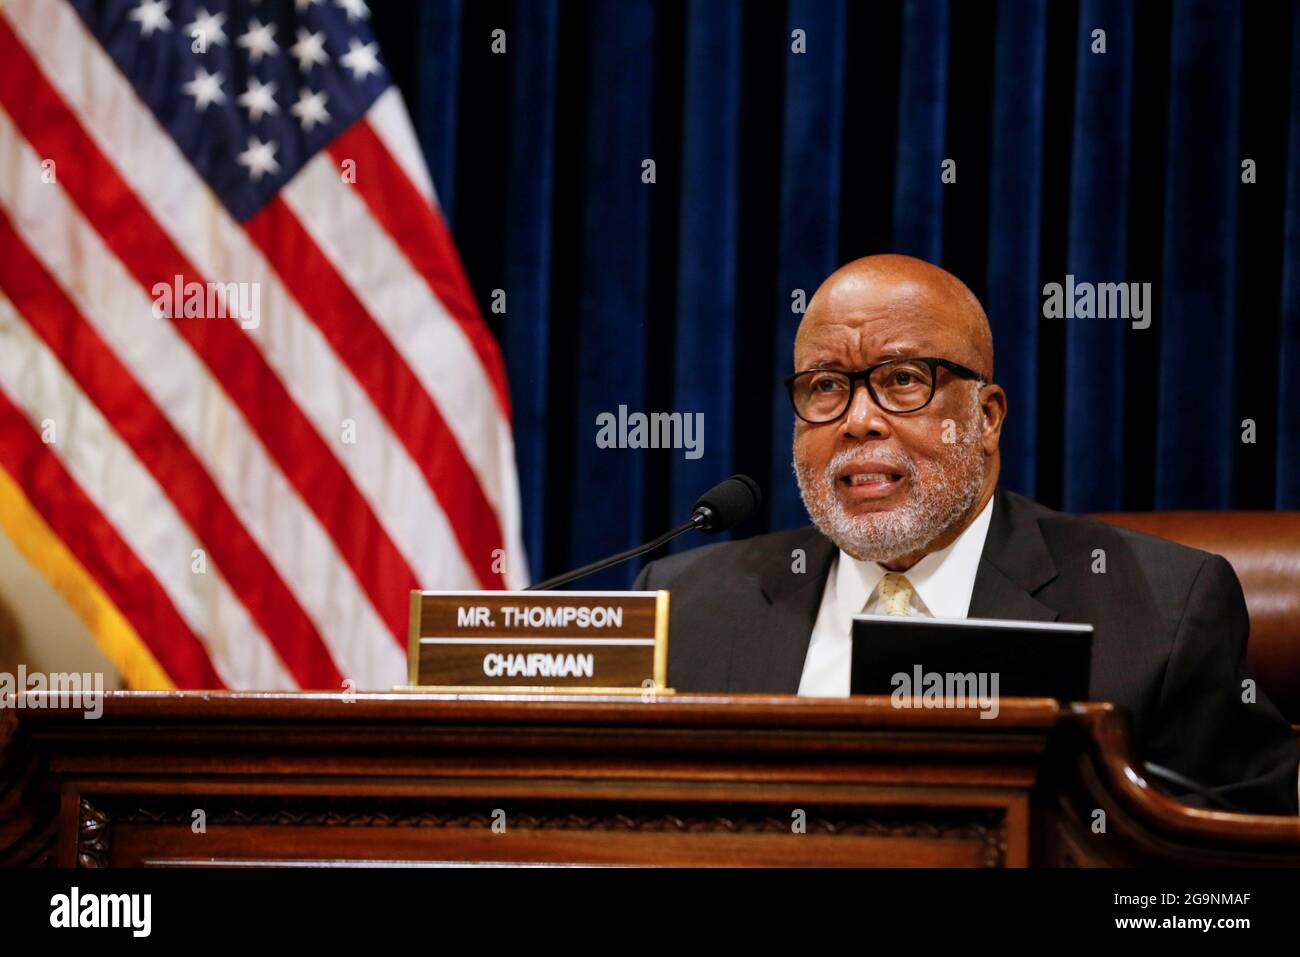 U.S. Representative Bennie Thompson (D-MS), chairman of the Select Committee to Investigate the January 6th Attack on the U.S. Capitol, presides during the opening hearing of the U.S. House (Select) Committee investigating the January 6 attack on the U.S. Capitol, on Capitol Hill in Washington, U.S., July 27, 2021. REUTERS/Jim Bourg/Pool Stock Photo